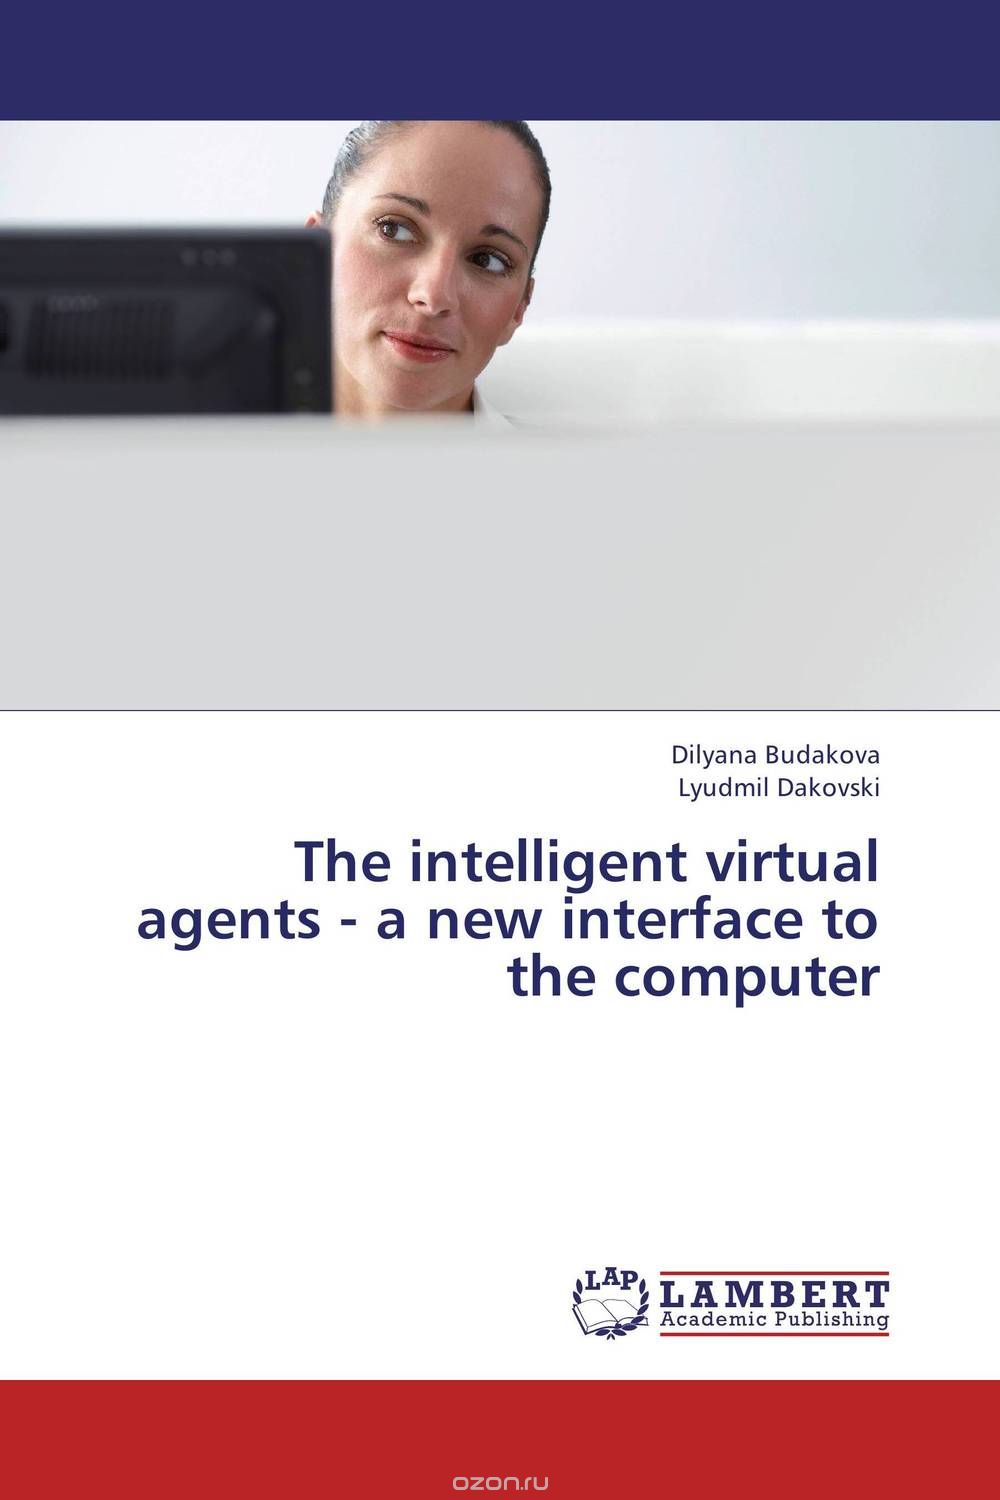 The intelligent virtual agents - a new interface to the computer